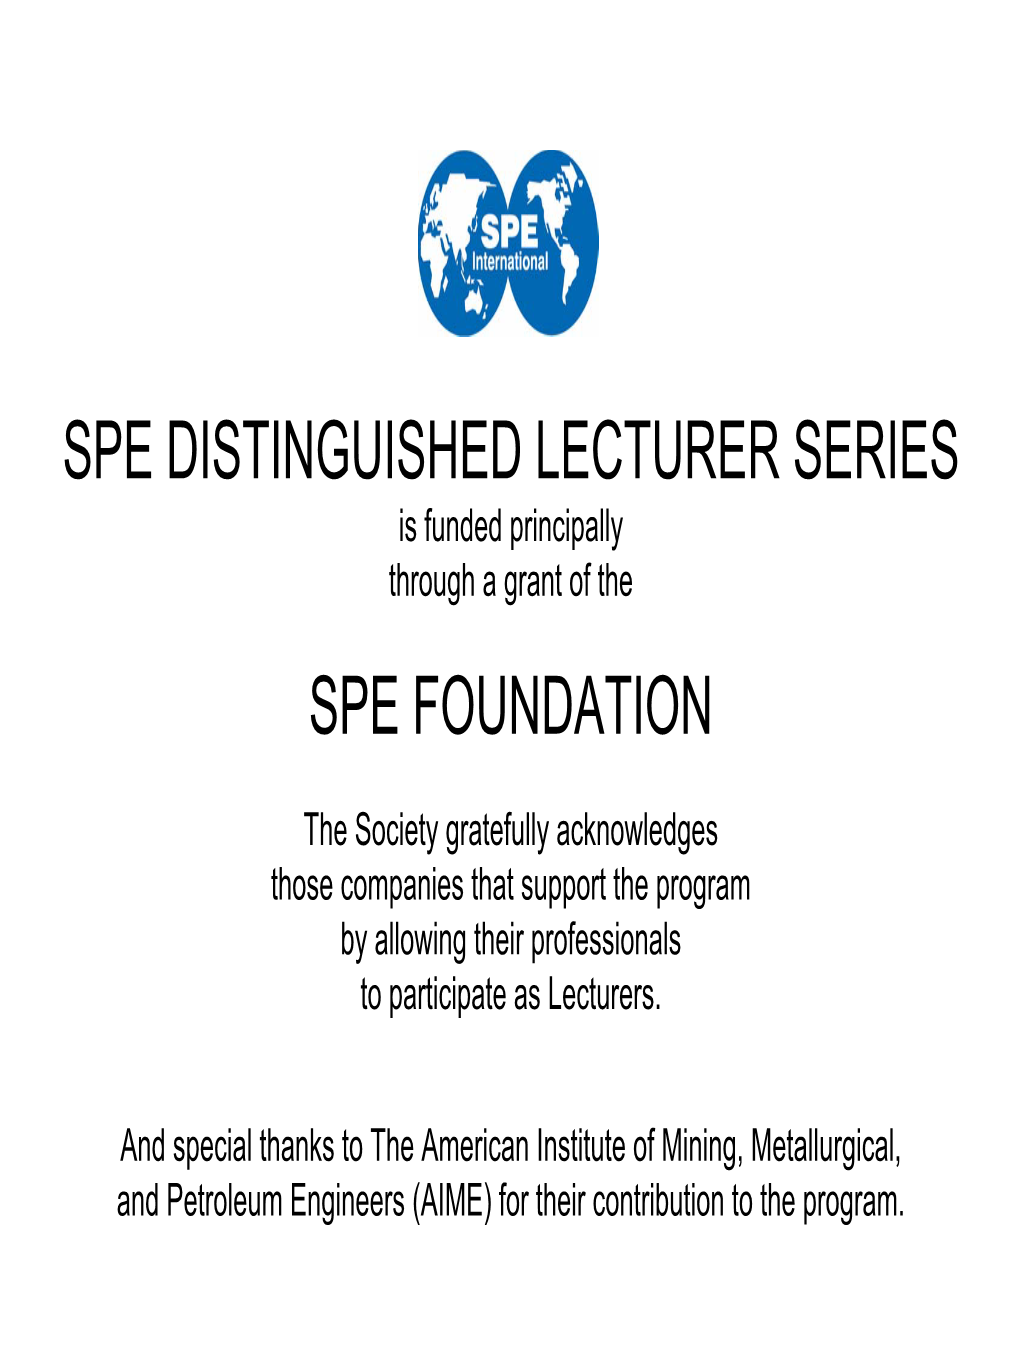 SPE DISTINGUISHED LECTURER SERIES Is Funded Principally Through a Grant of the SPE FOUNDATION